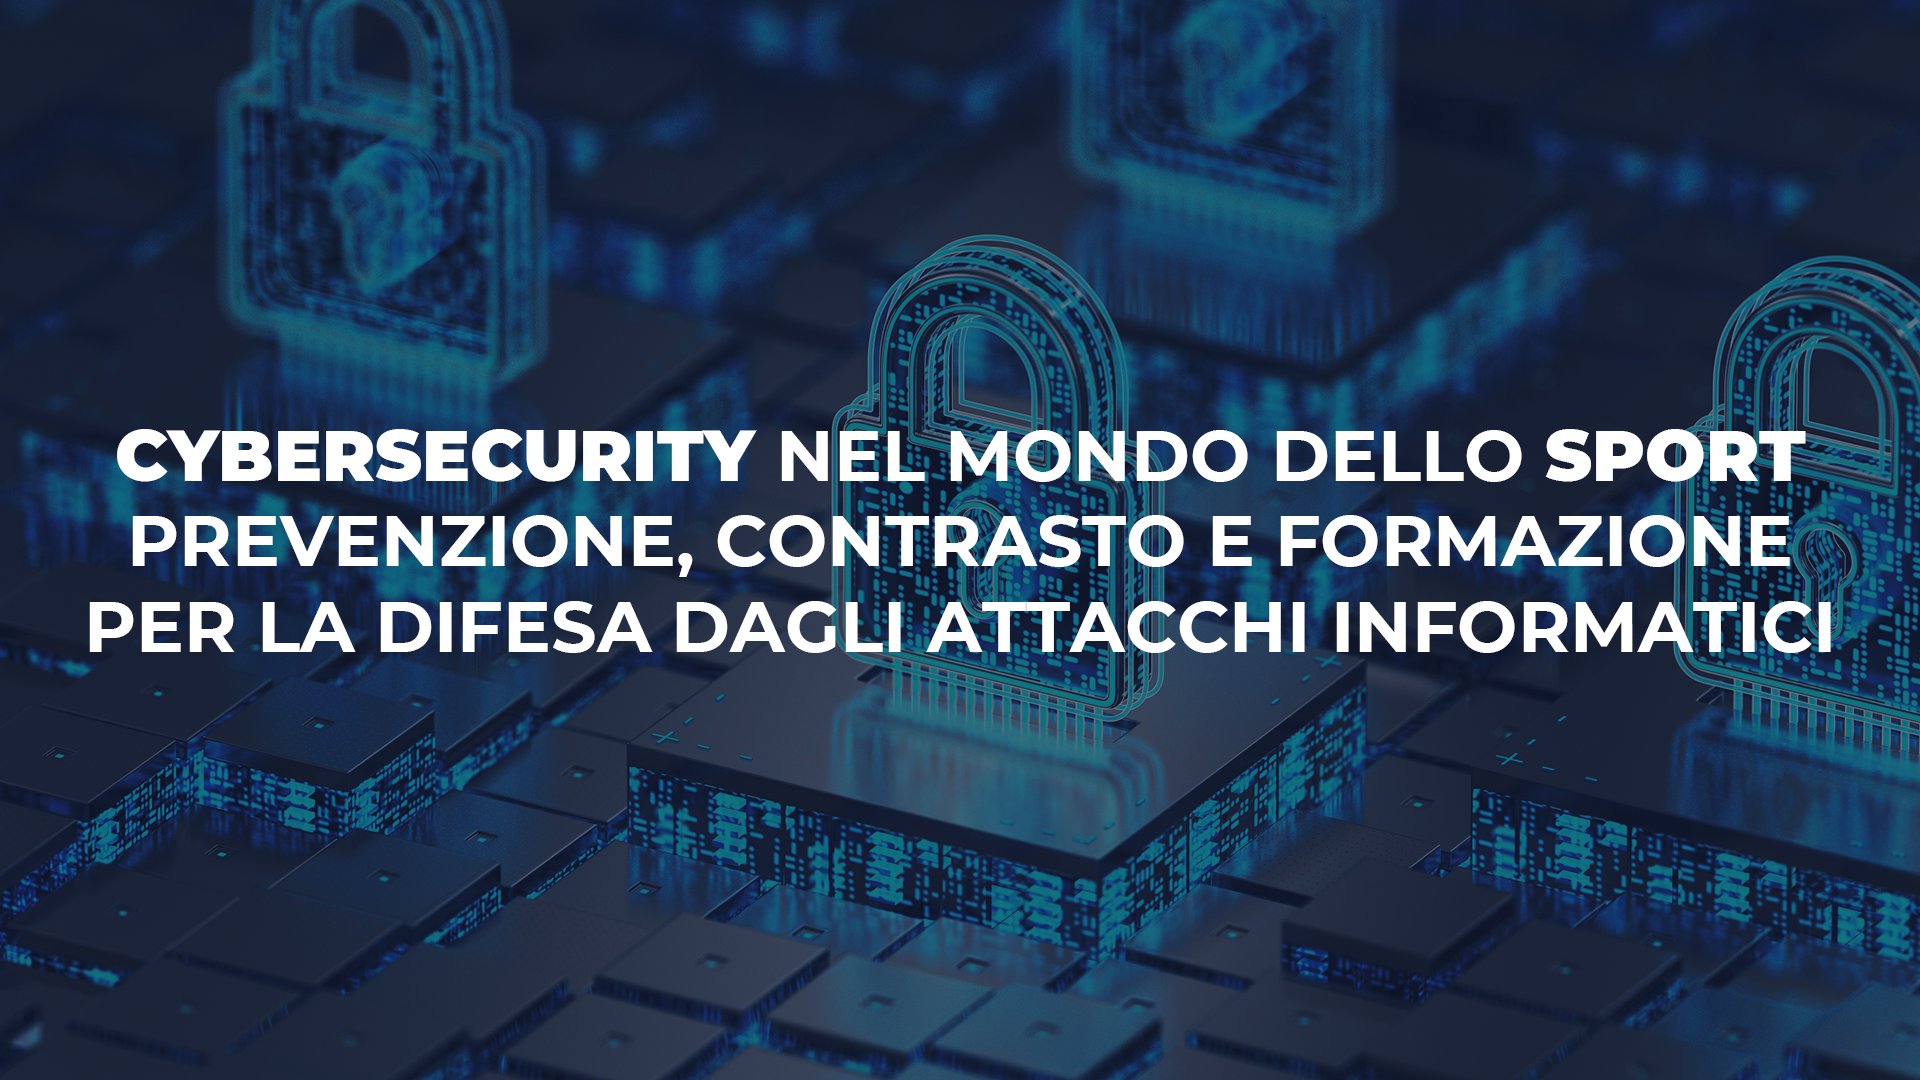 Cybersecurity in the world of Sport.  Experts, technicians and institutions will meet together on Wednesday 22 May in Rome